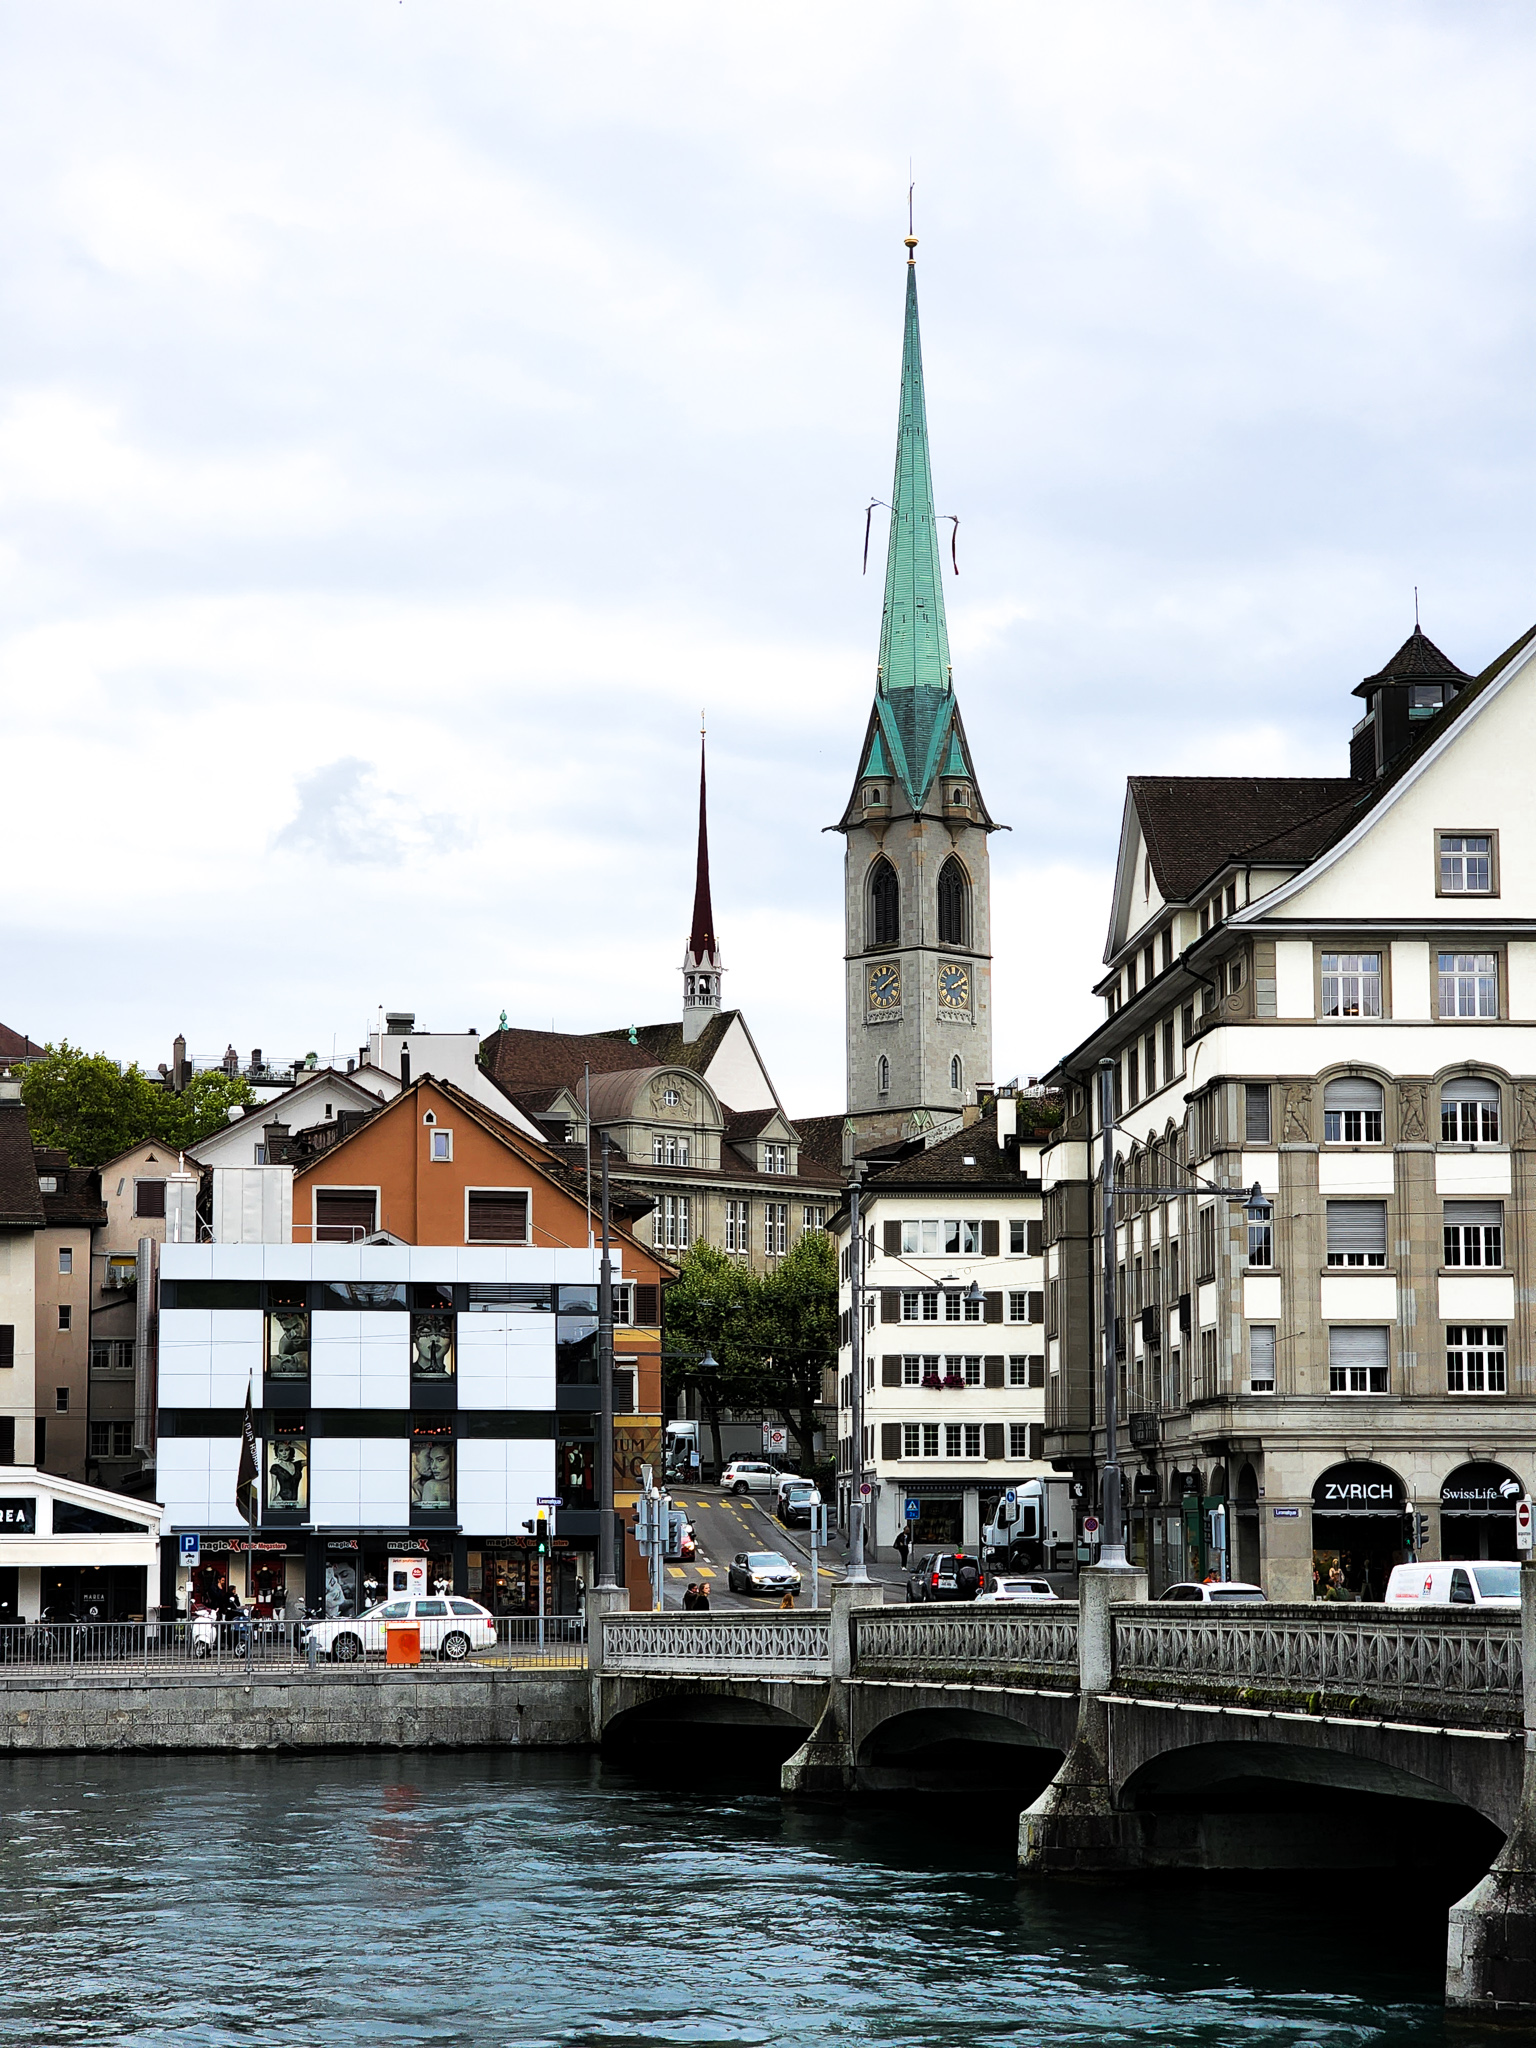 Zurich old town visit to see